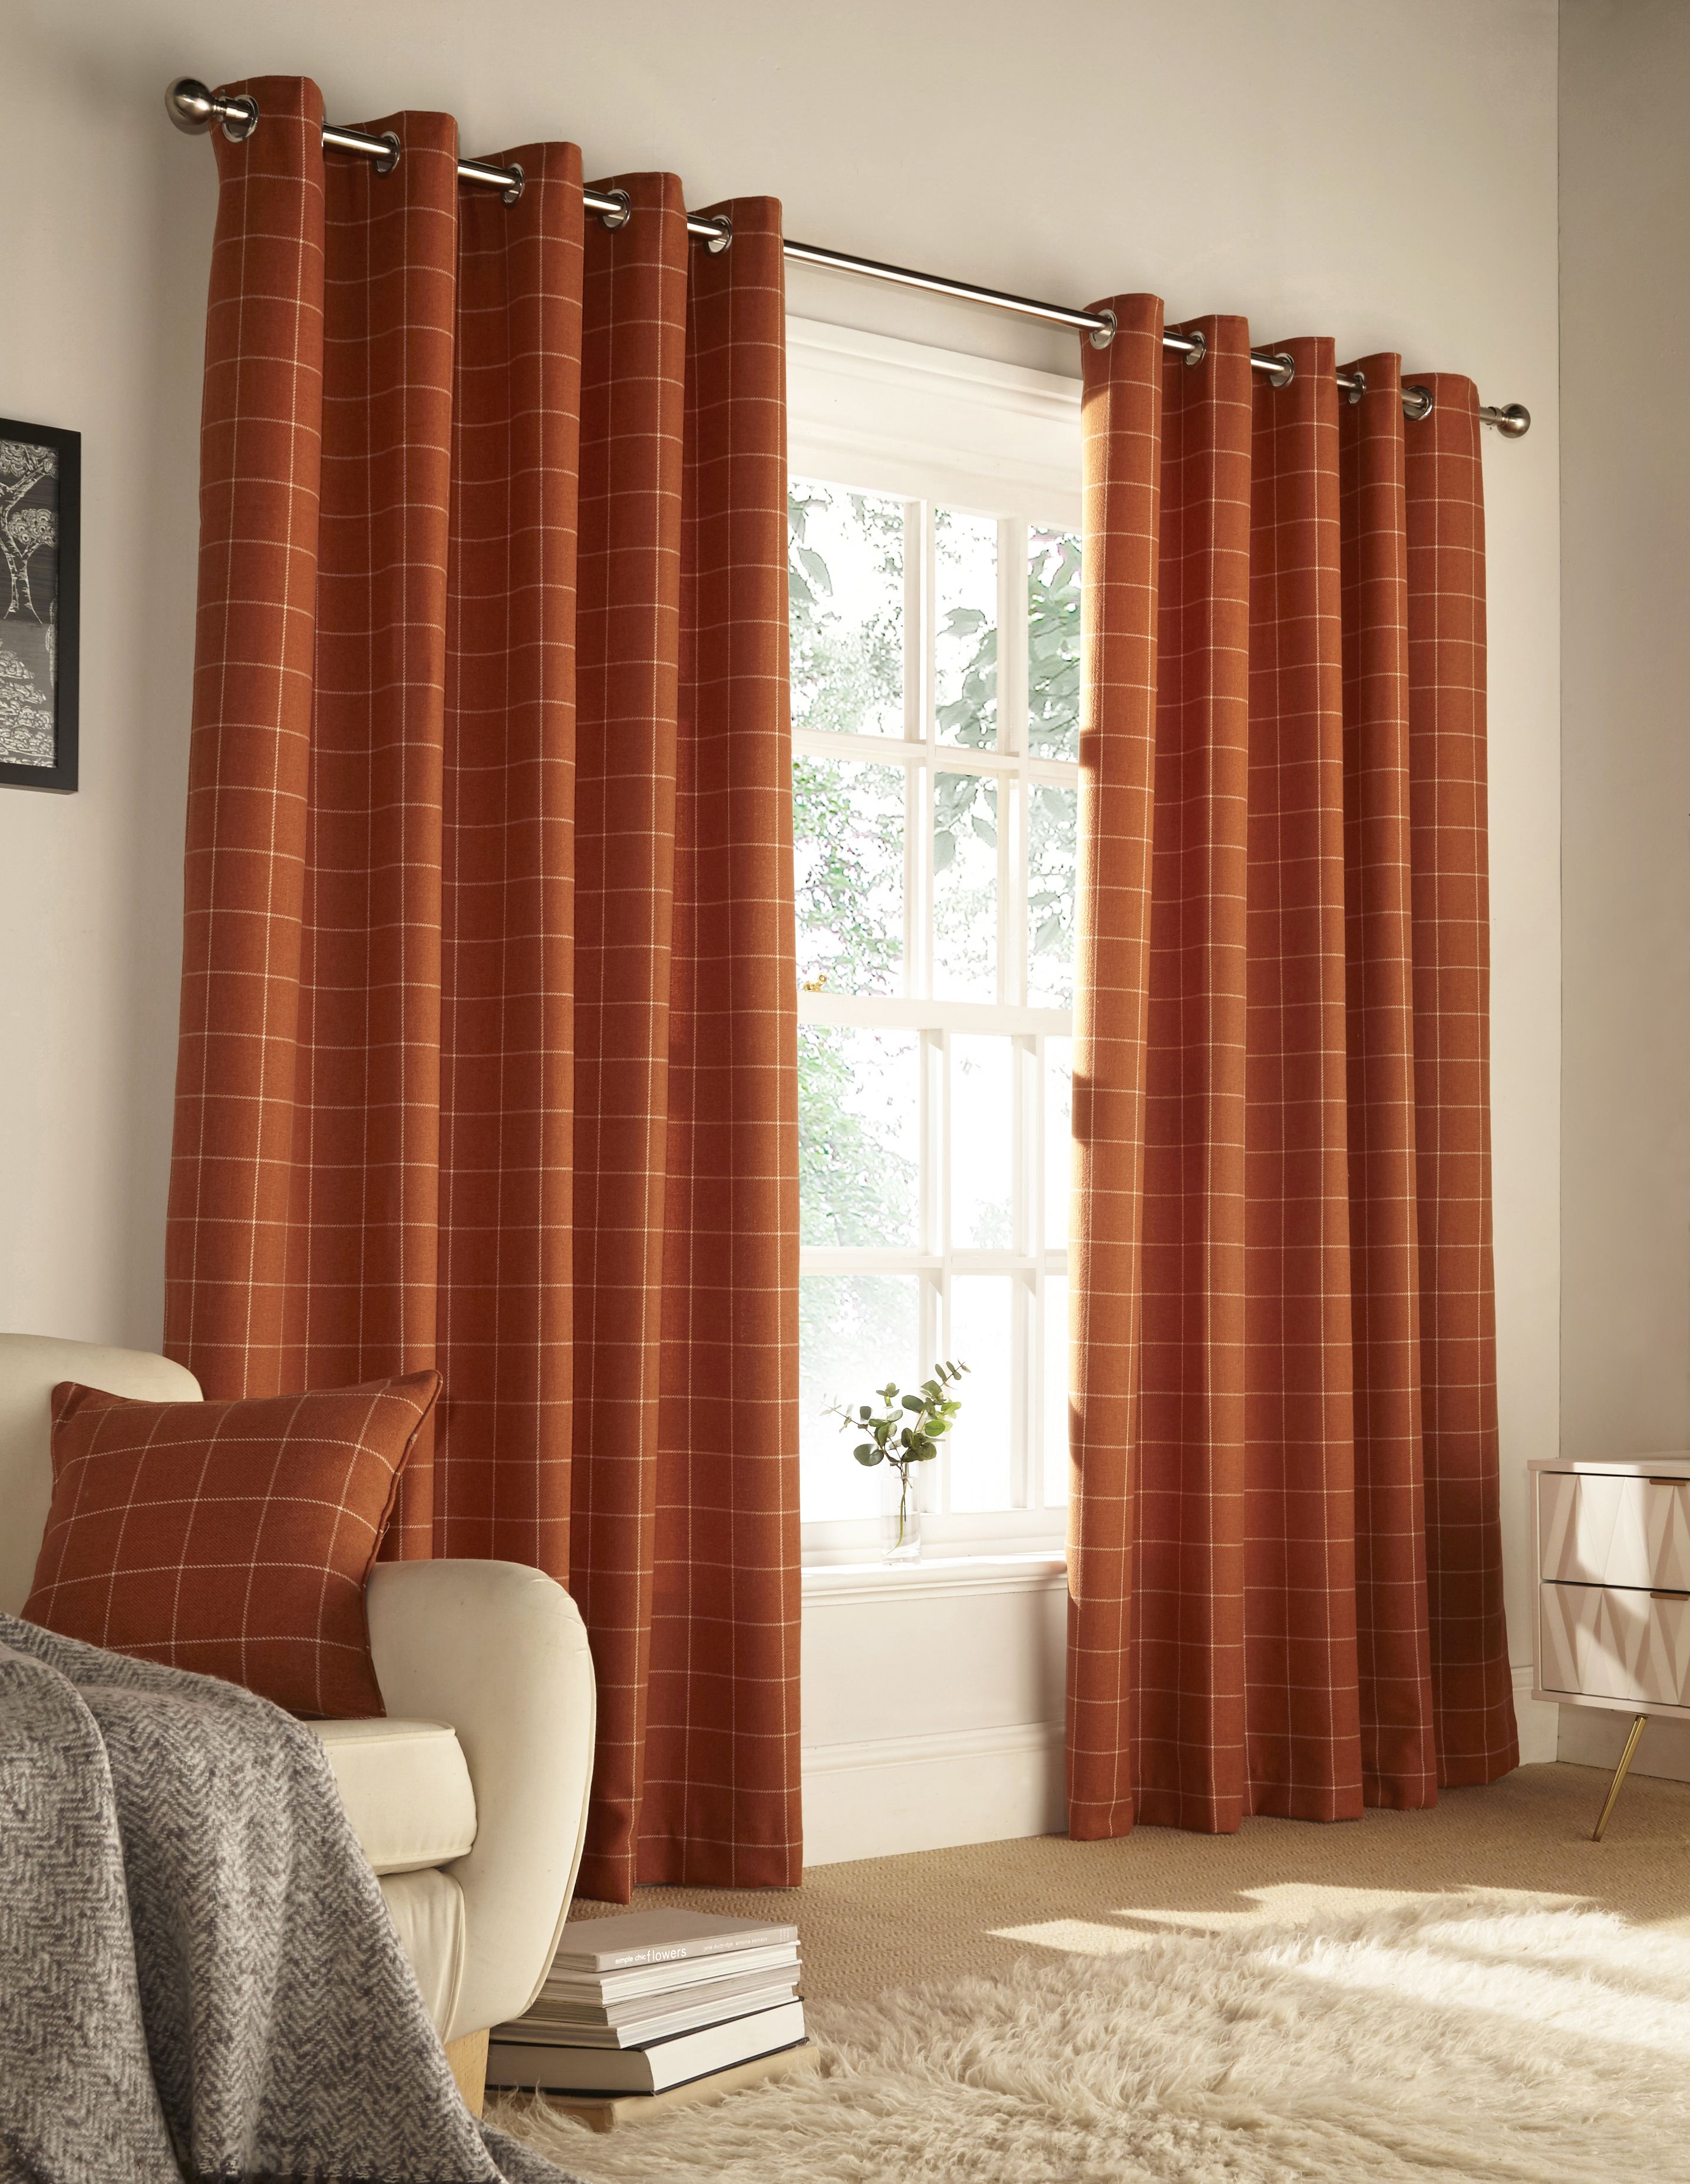 Add a cosy yet contemporary look to your décor with this modern and classic curtain set, which features a windowpane check design. Made with a luxurious lightweight wool-like woven fabric holds outstanding durability and wrinkle resistance as well as having strong rustic colours that will compliment any interior. These curtains are perfect to keep your home warm in winter and cool in summer.